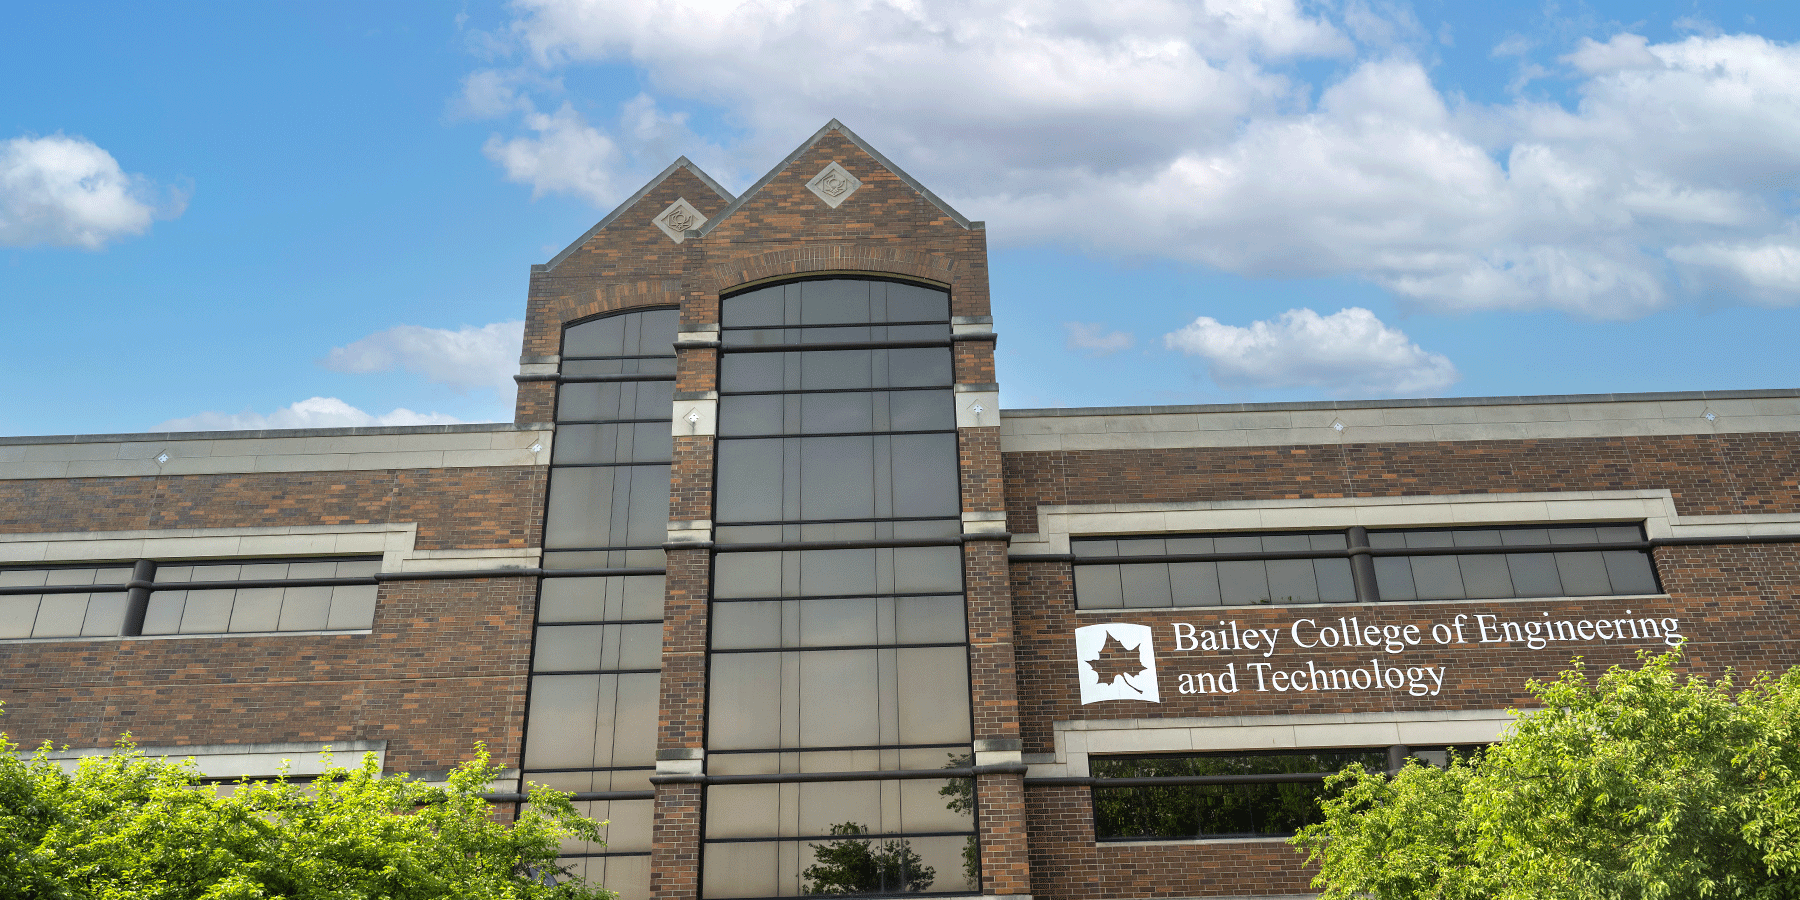 Exterior of the Bailey College of Engineering and Technology building